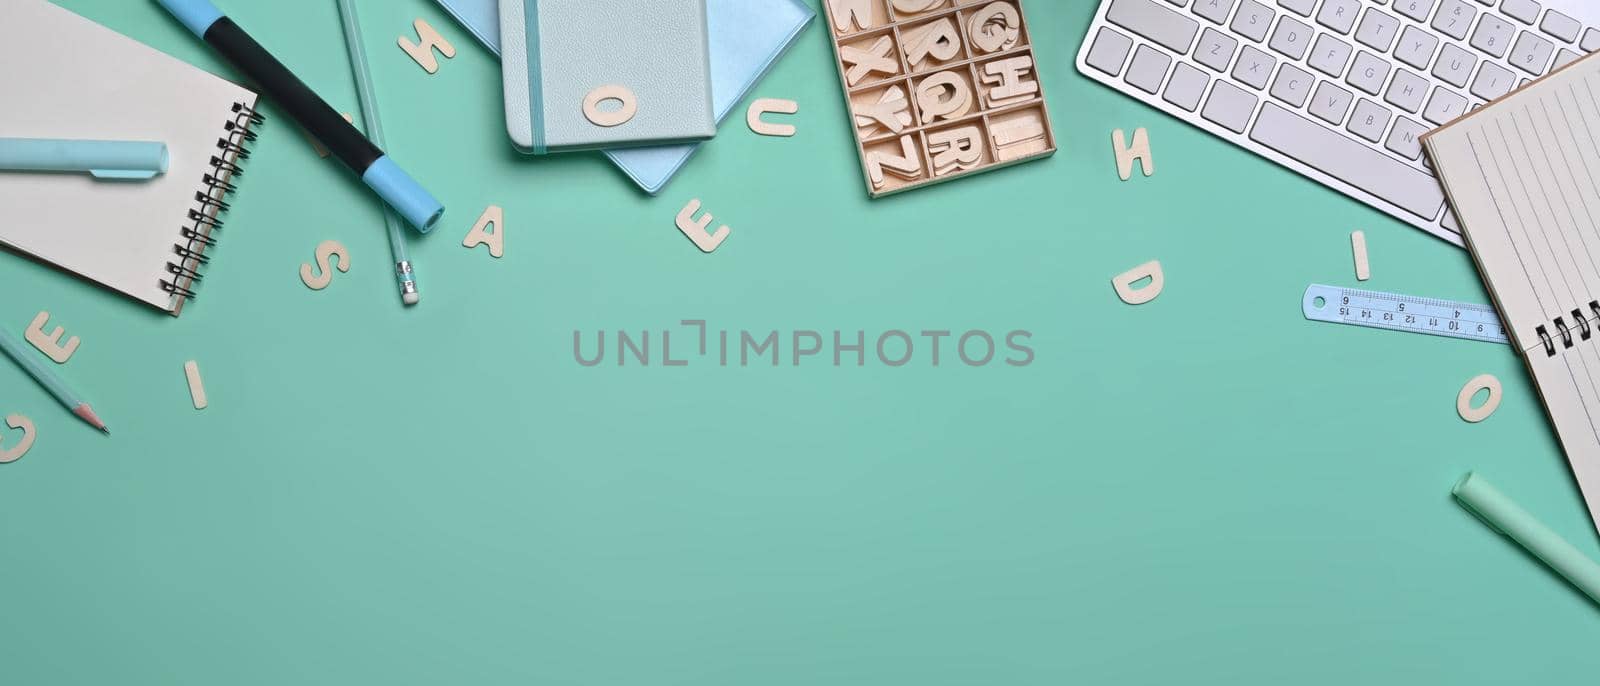 Top view various stationery and keyboard on green background. by prathanchorruangsak